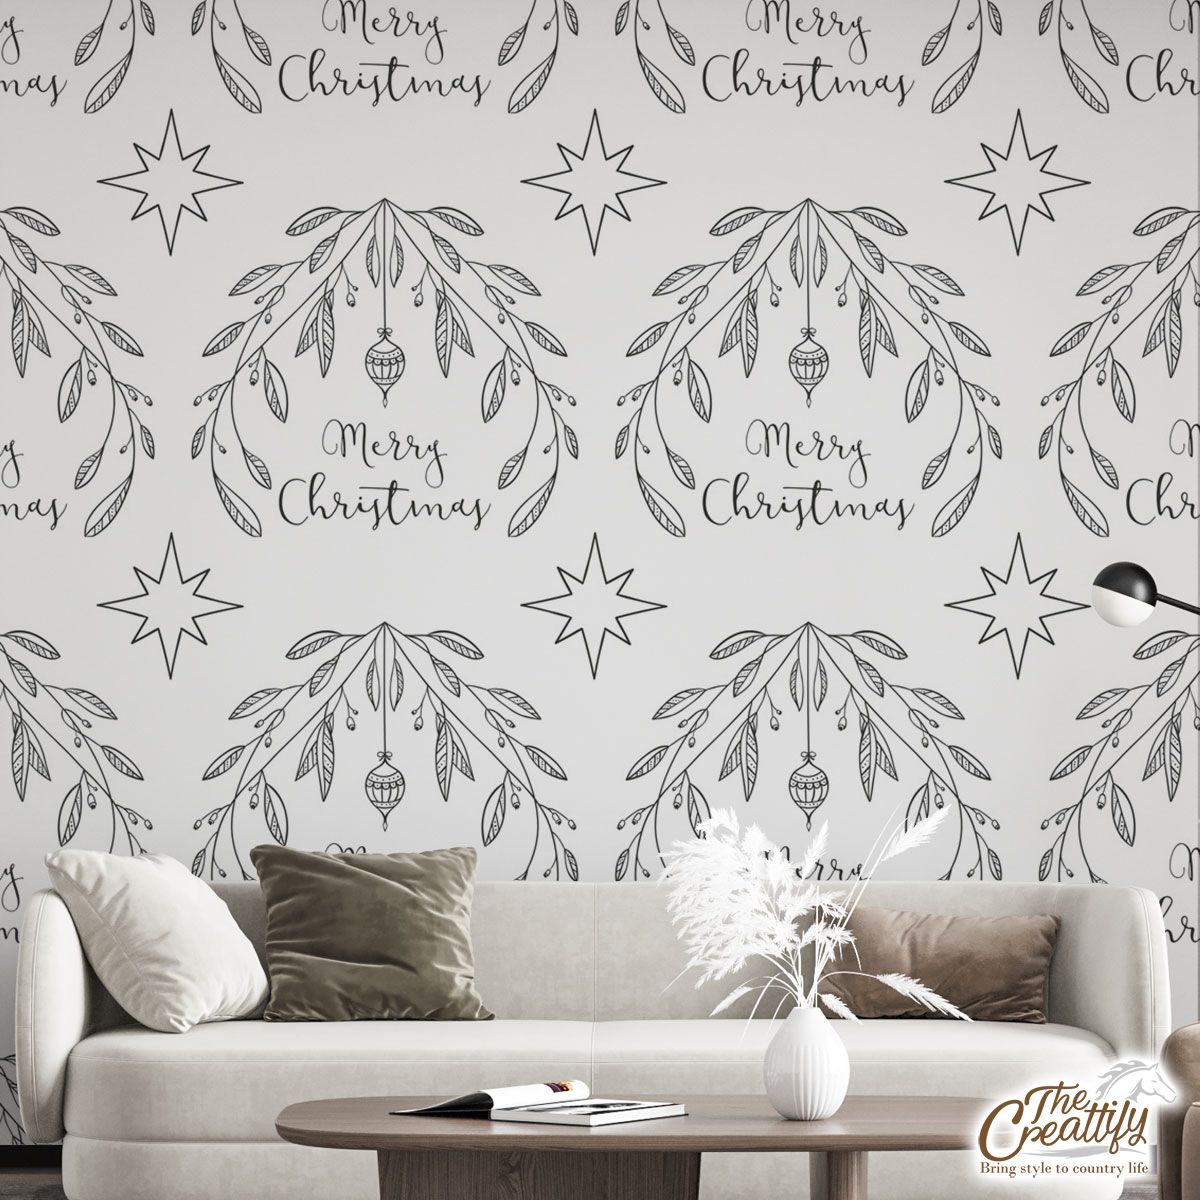 Merry Christmas With Black And White Christmas Mistletoe Wall Mural